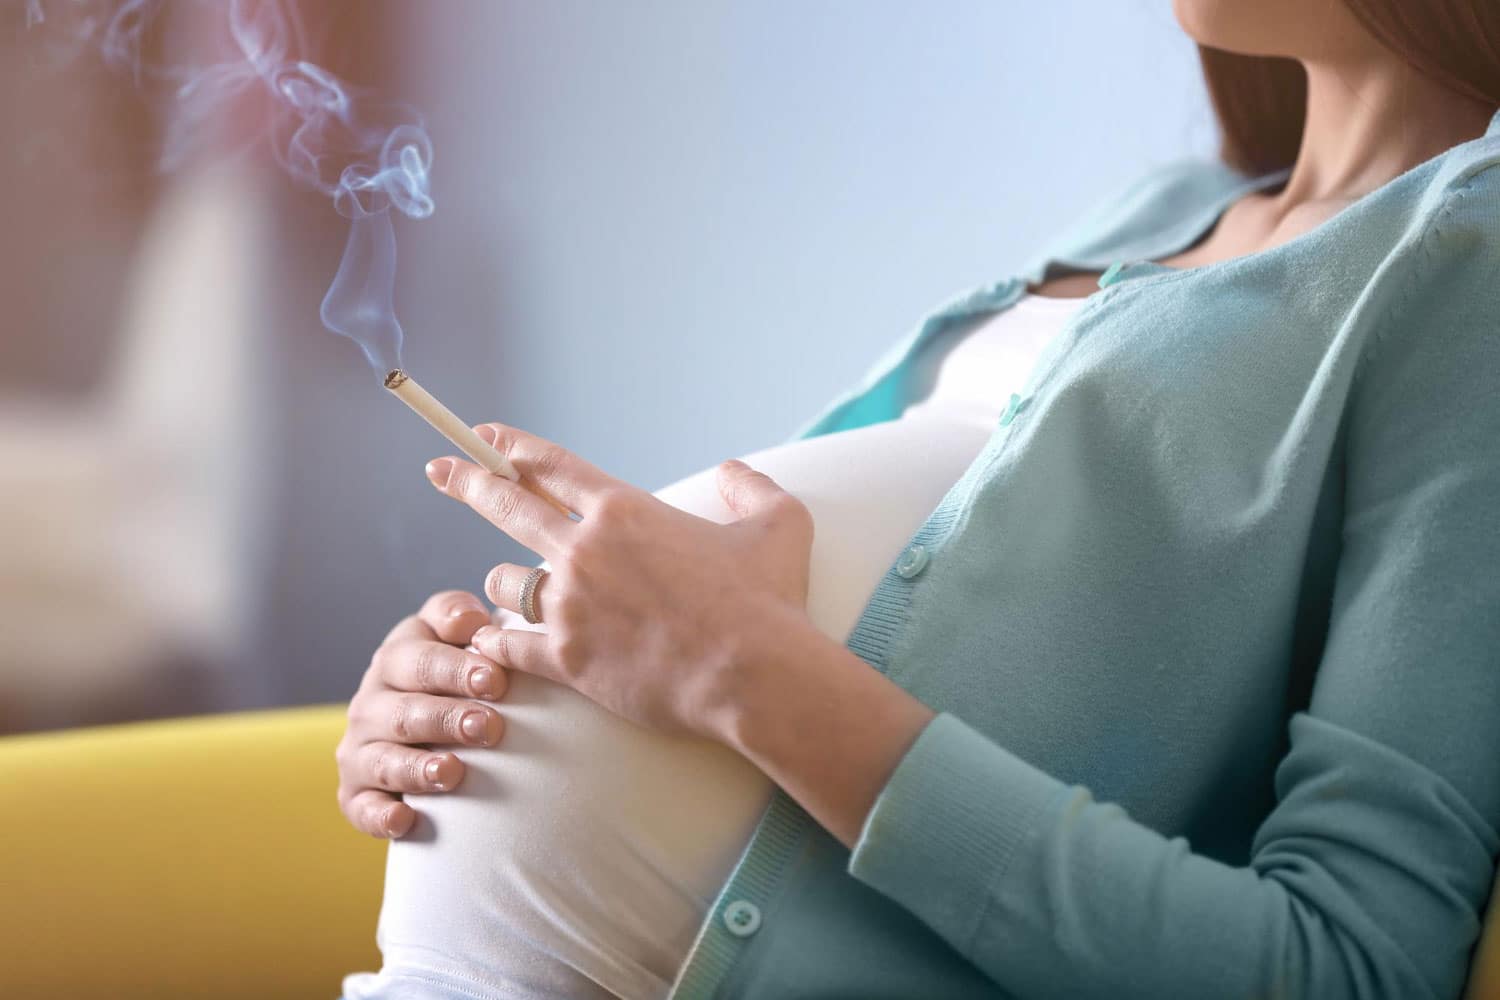 Image showing cigarette in pregnant lady's hand